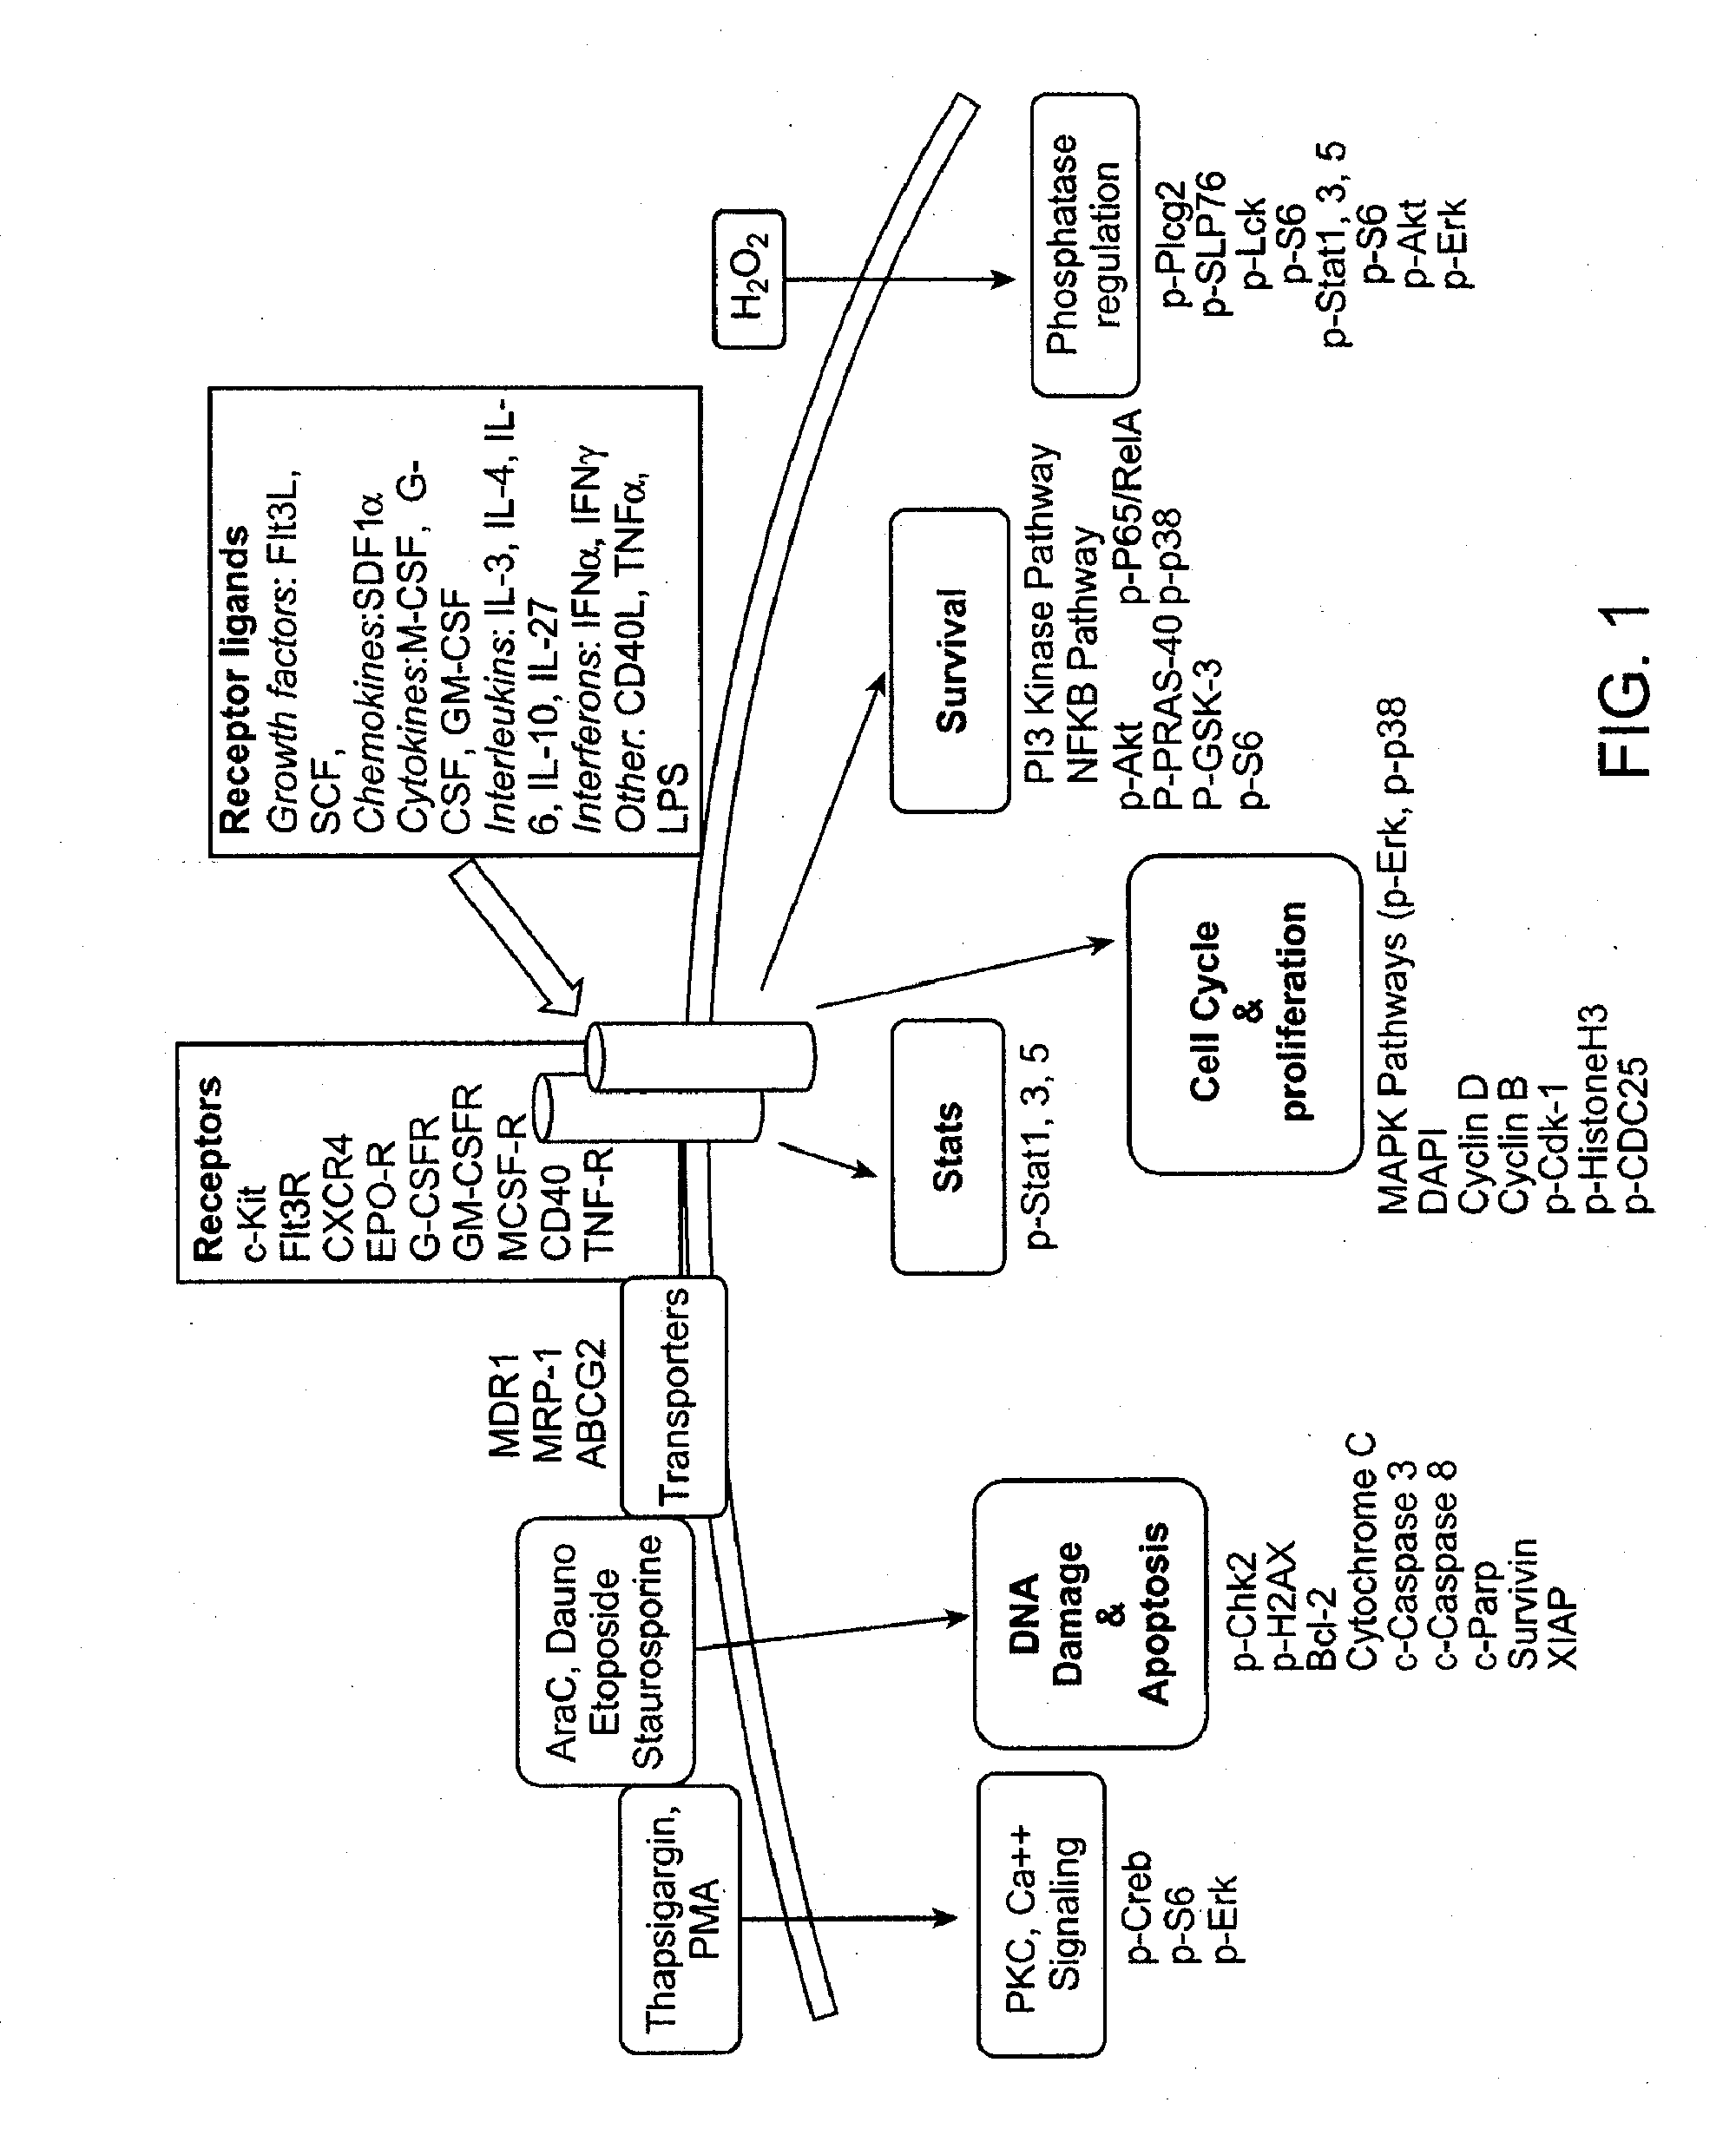 Methods for diagnosis, prognosis and methods of treatment